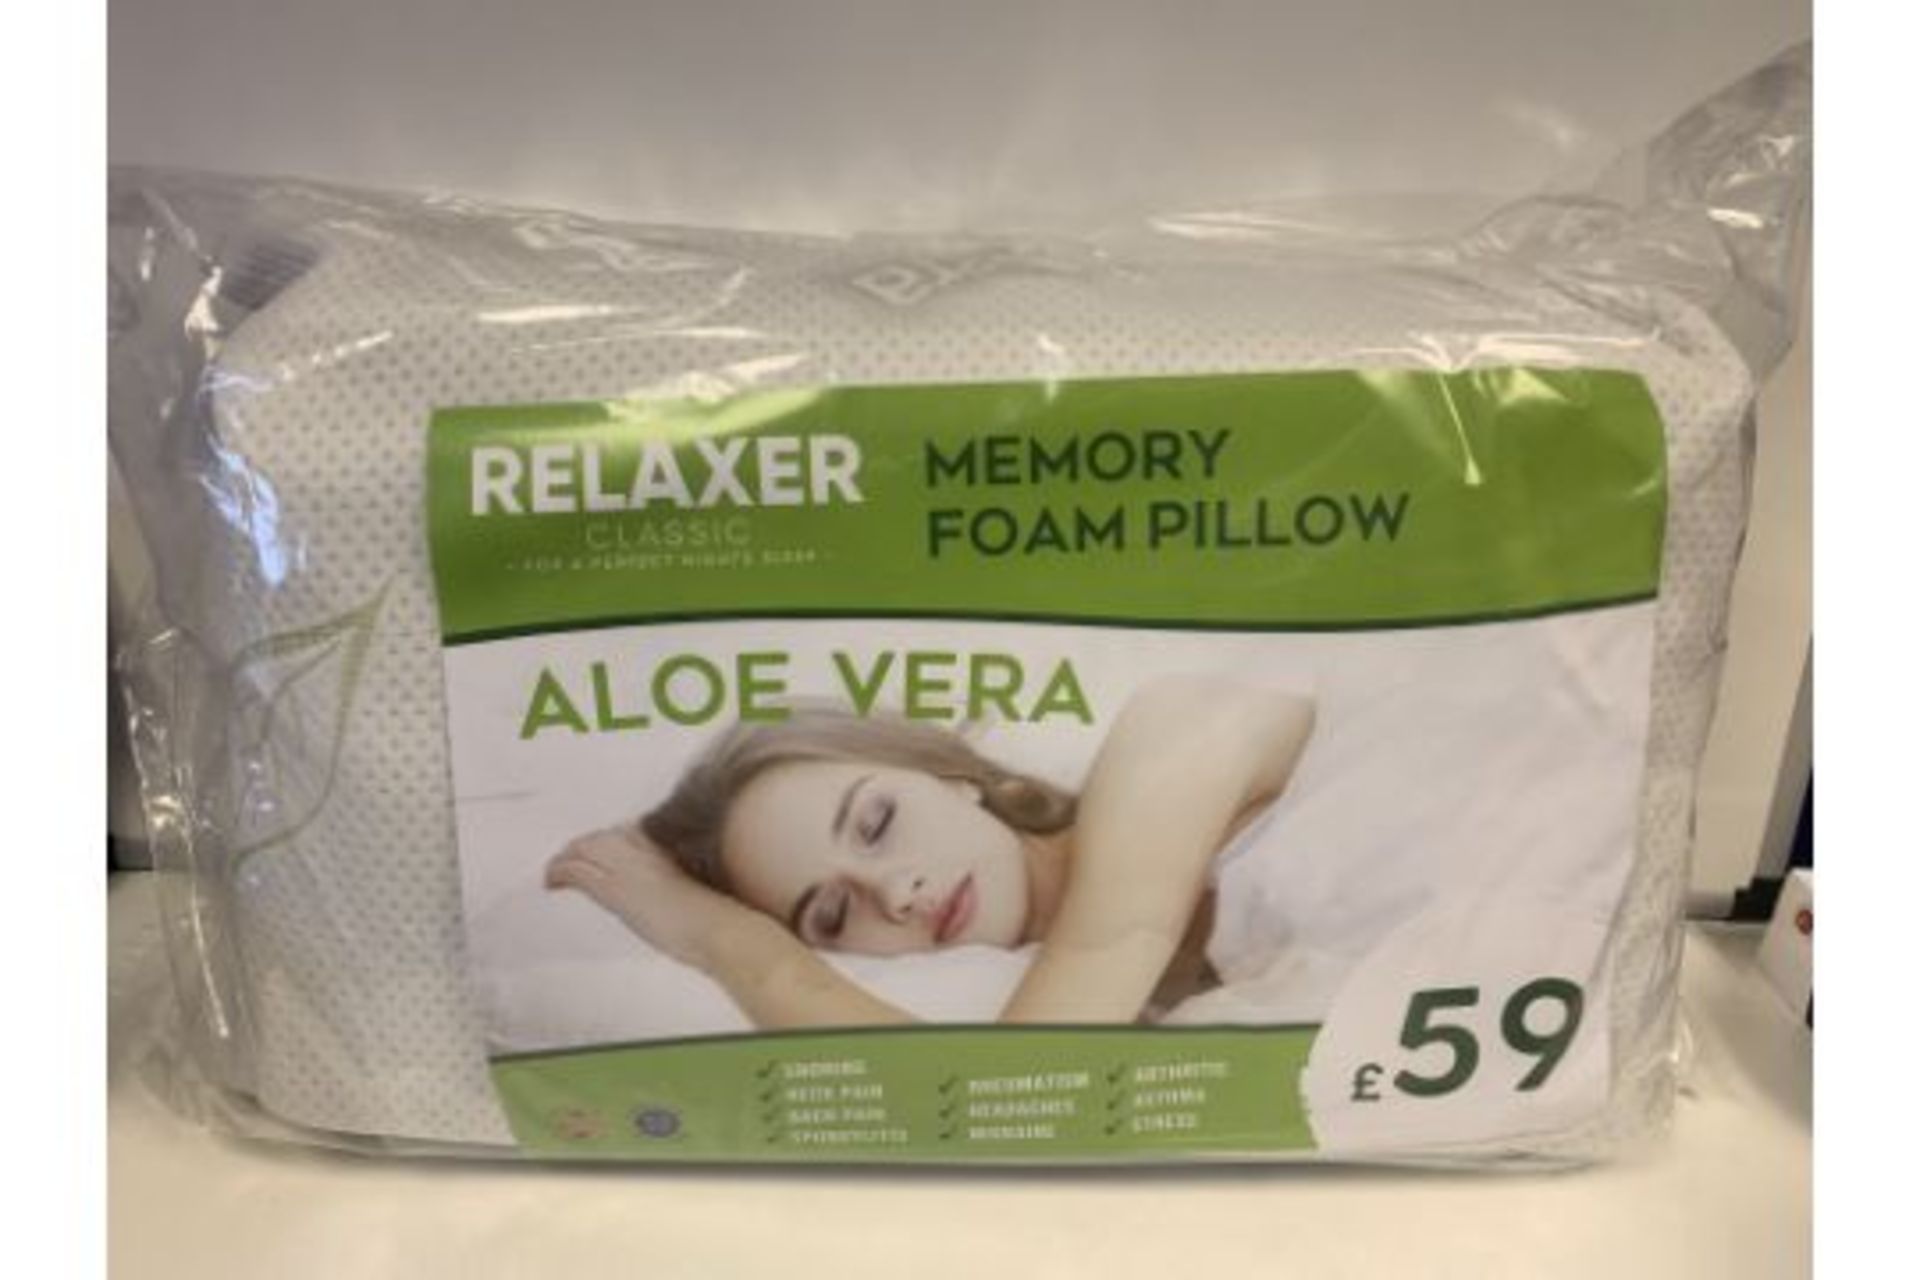 5 x NEW SEALED RELAXER CLASSIC LUXURY MEMORY FOAM PILLOWS. PRICE MARKED AT £59 EACH